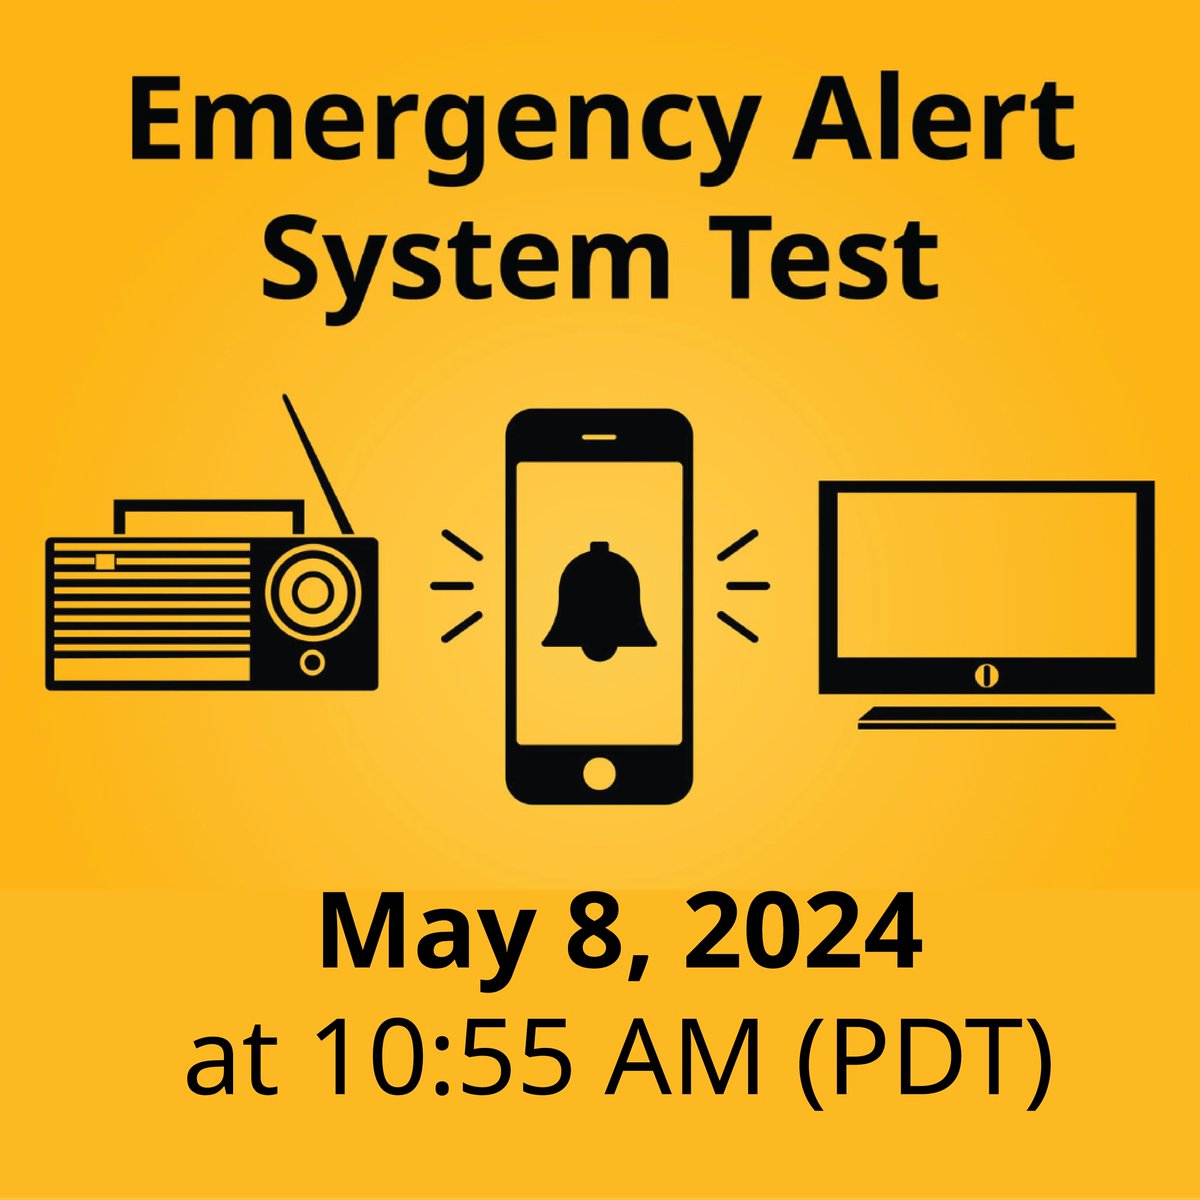 At 10:55 AM (PDT) TODAY, the Emergency Alert system will be tested. During today’s test, you will hear an alert tone & receive a message on radio, TV & compatible cell phones. Learn more about emergency alerts and what to do if you receive one: ow.ly/RWIE50RuZzS